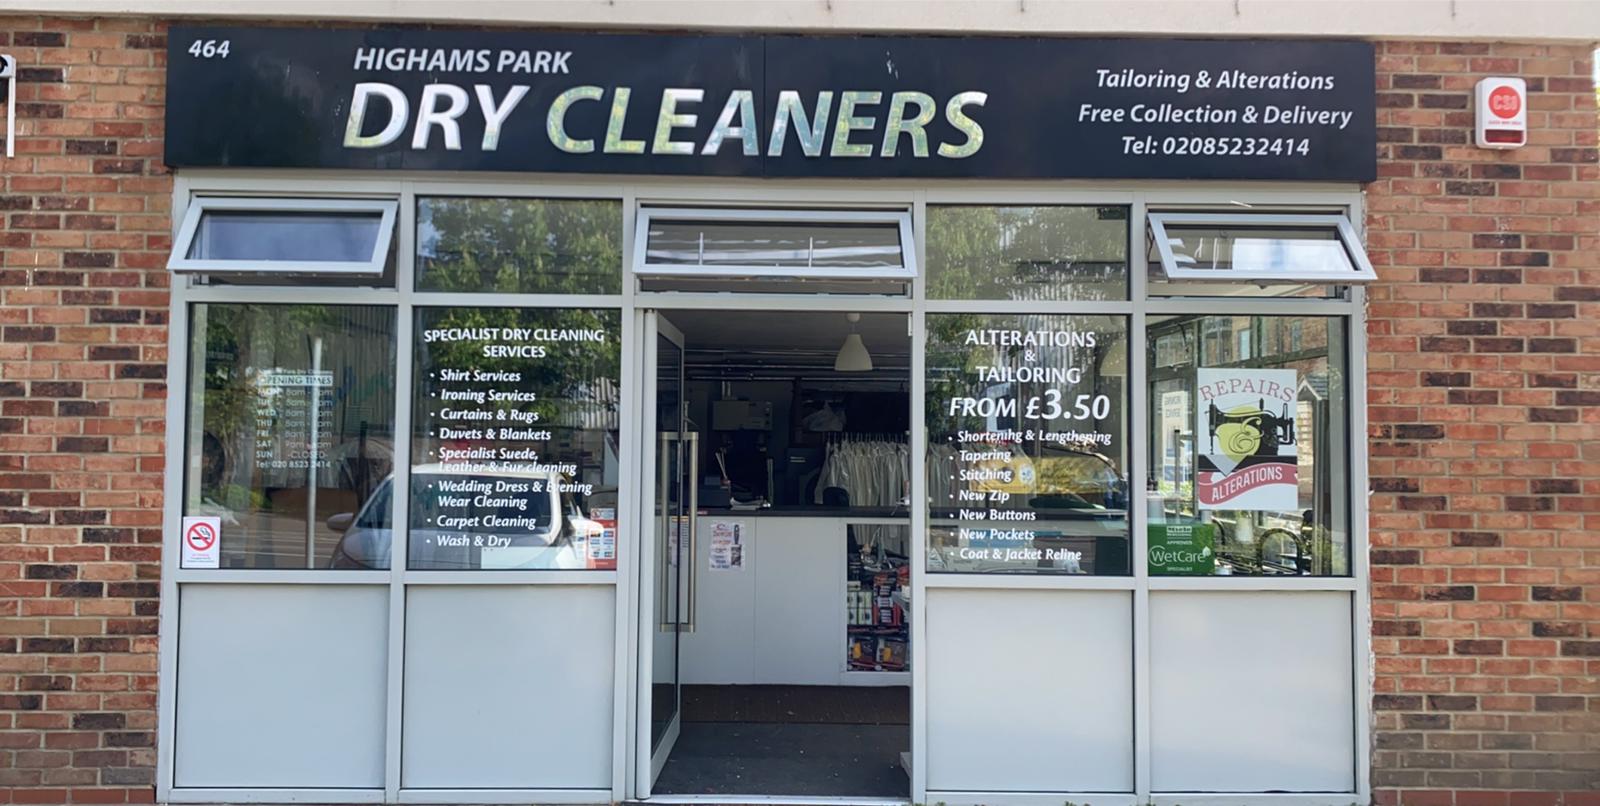 Highams park Dry cleaners